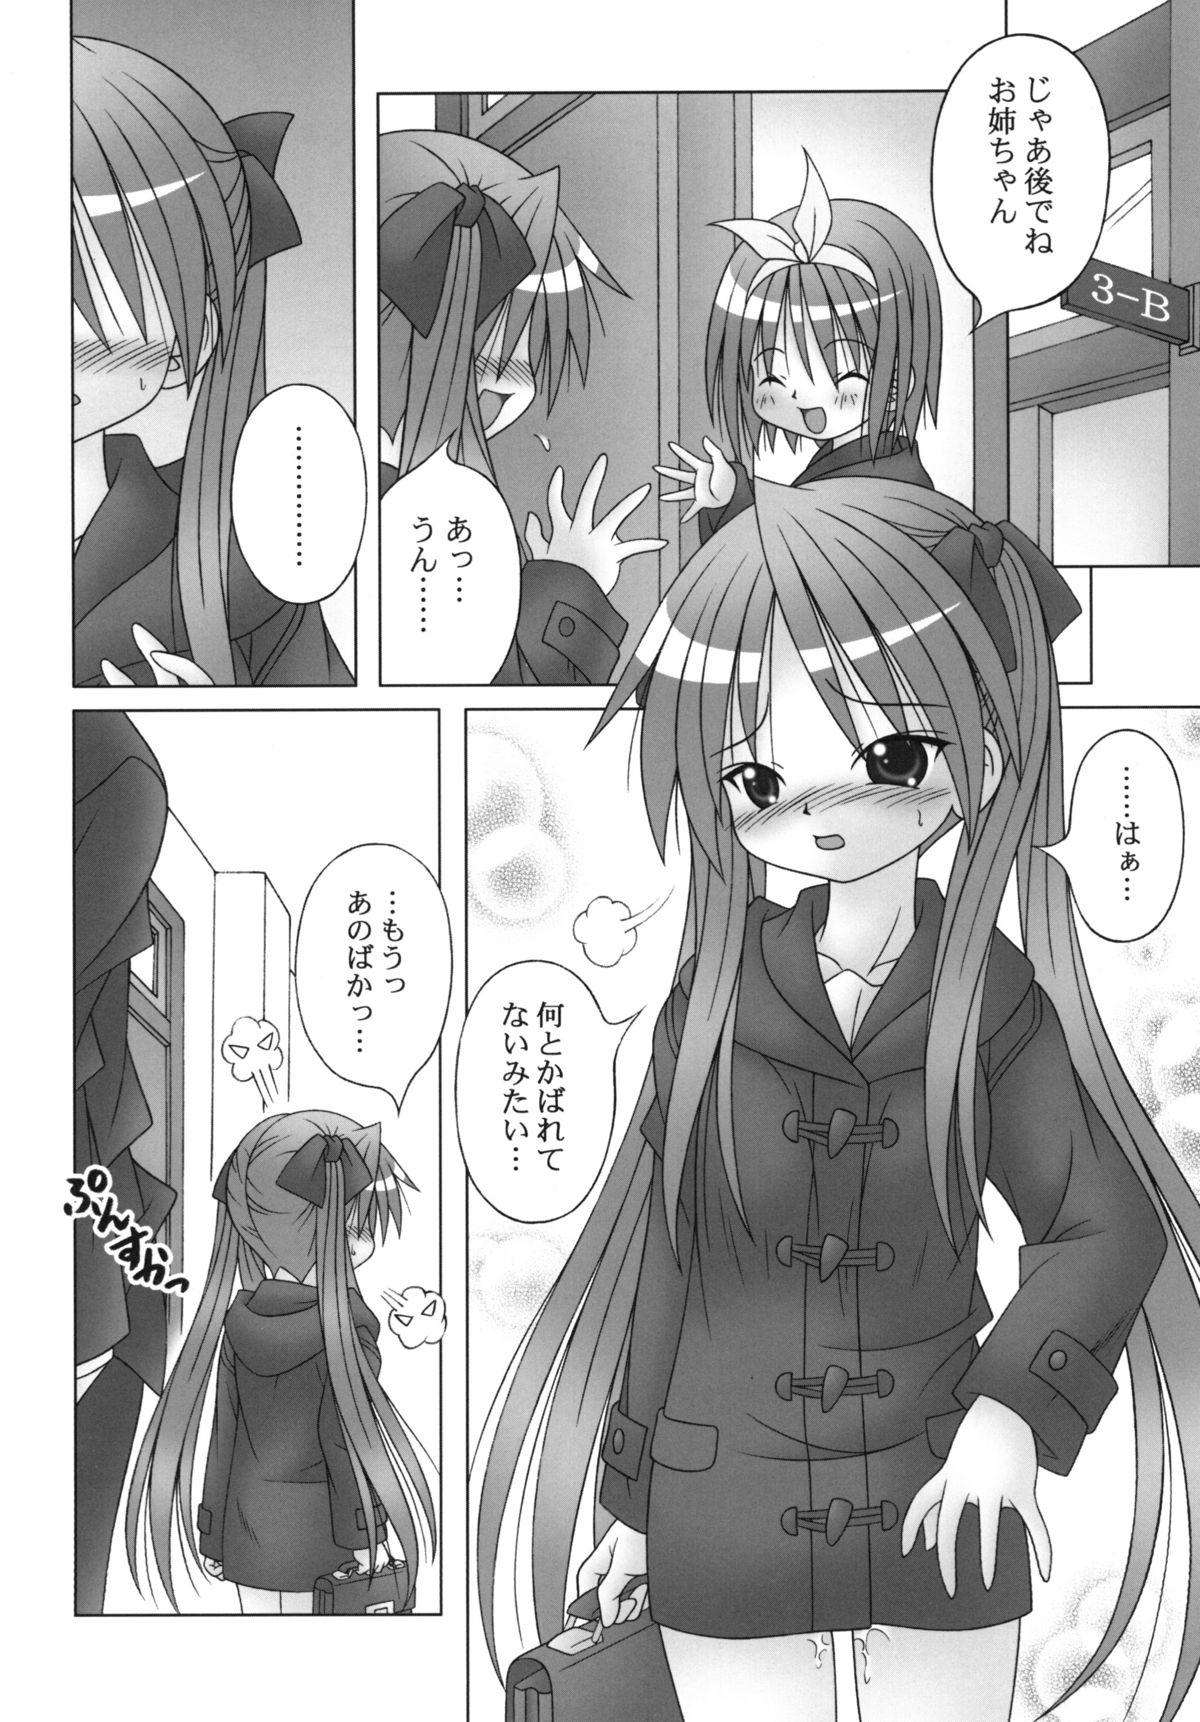 English LUCKY☆STABILIZER - Lucky star Mallu - Page 6